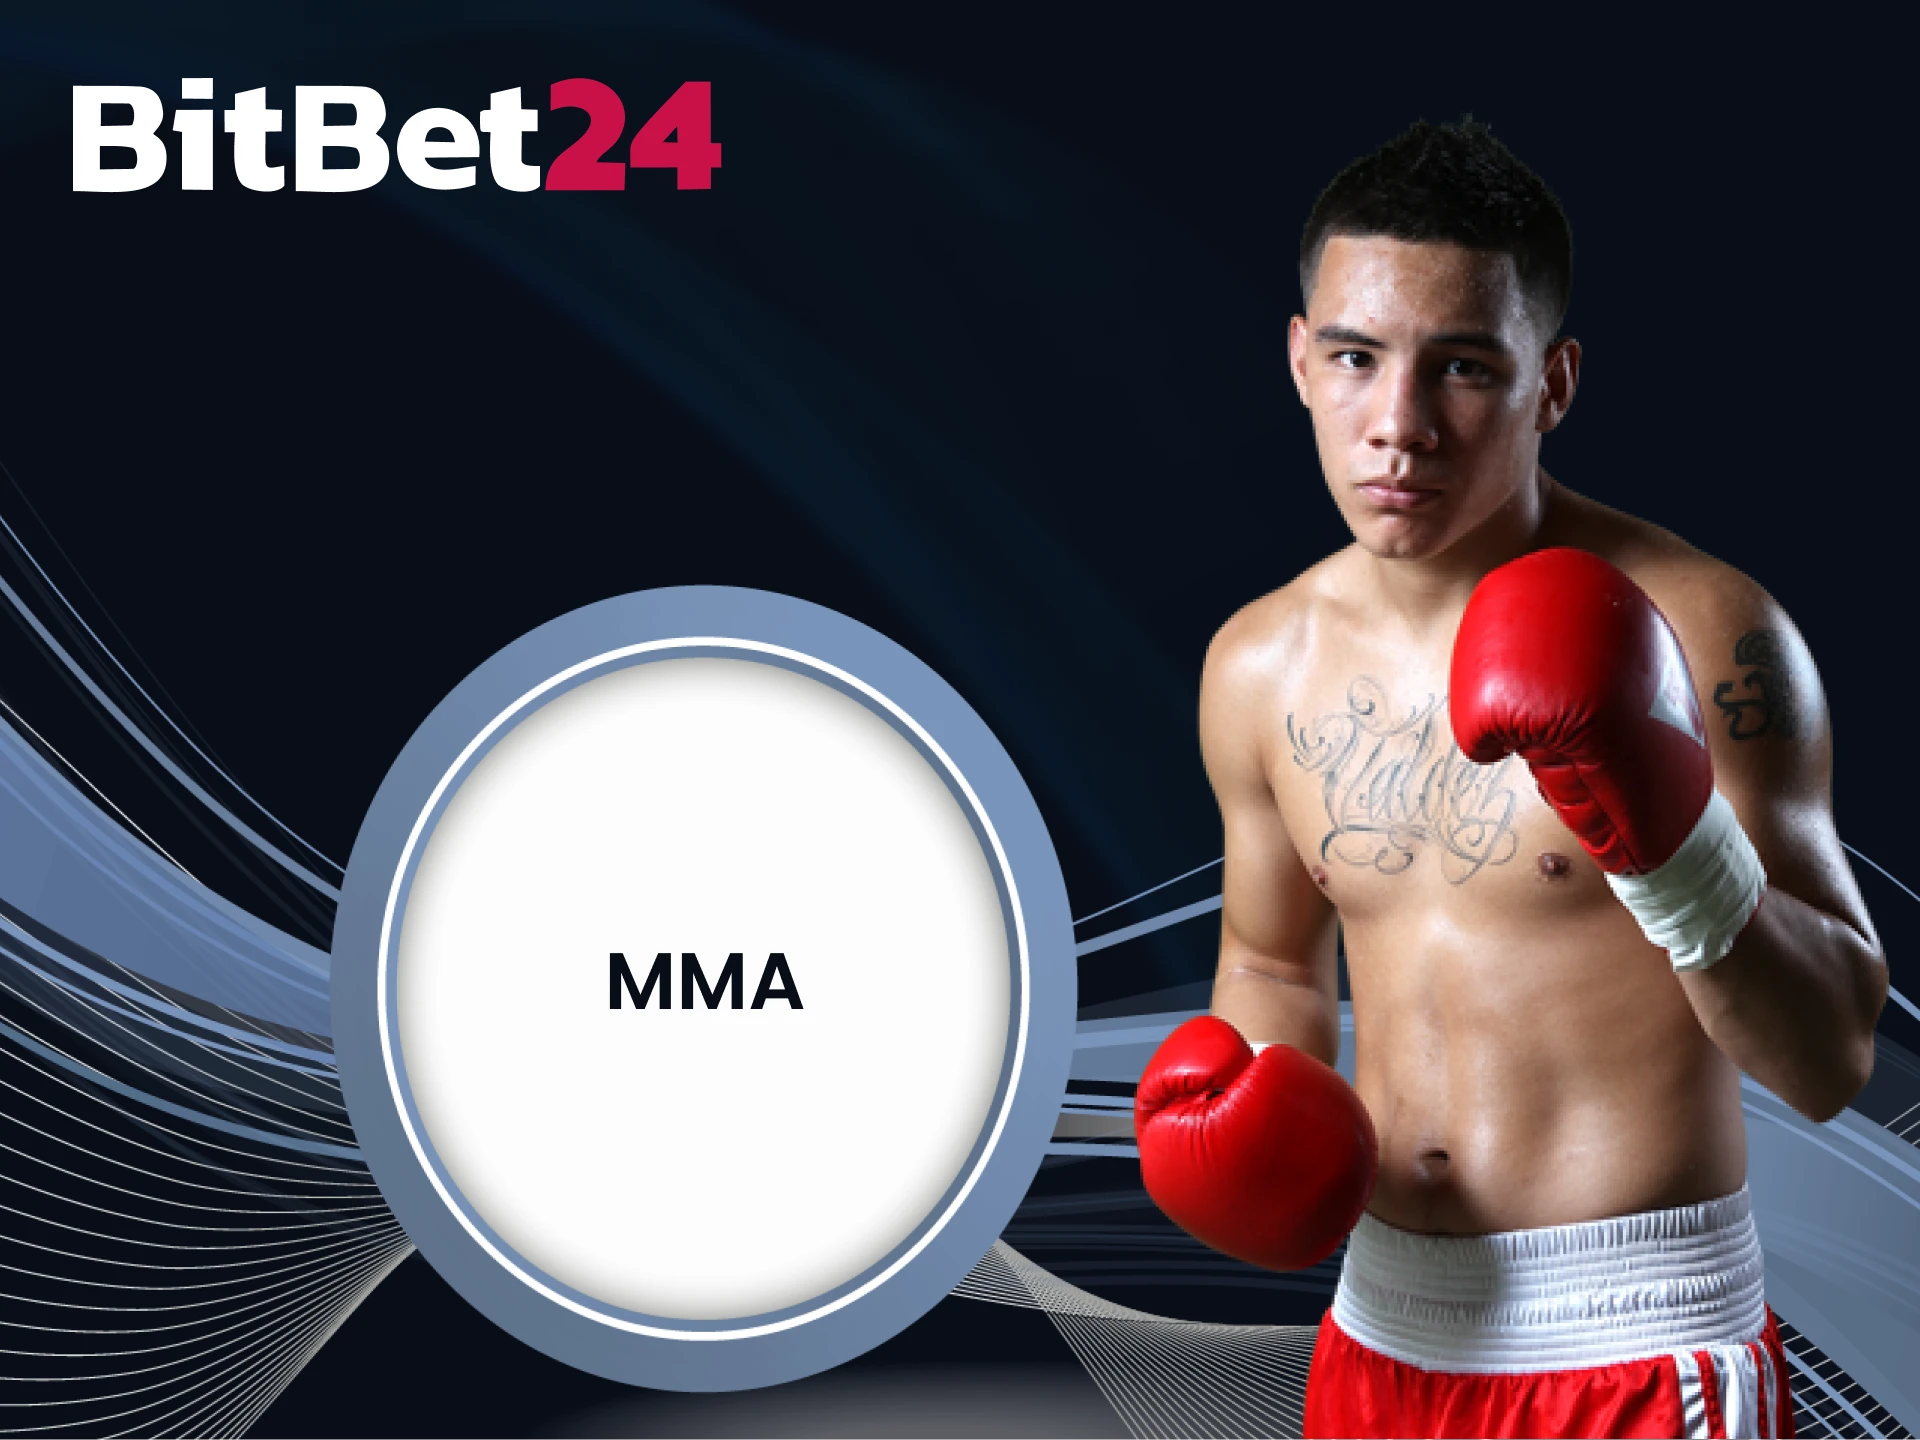 Bet on MMA with BitBet24.